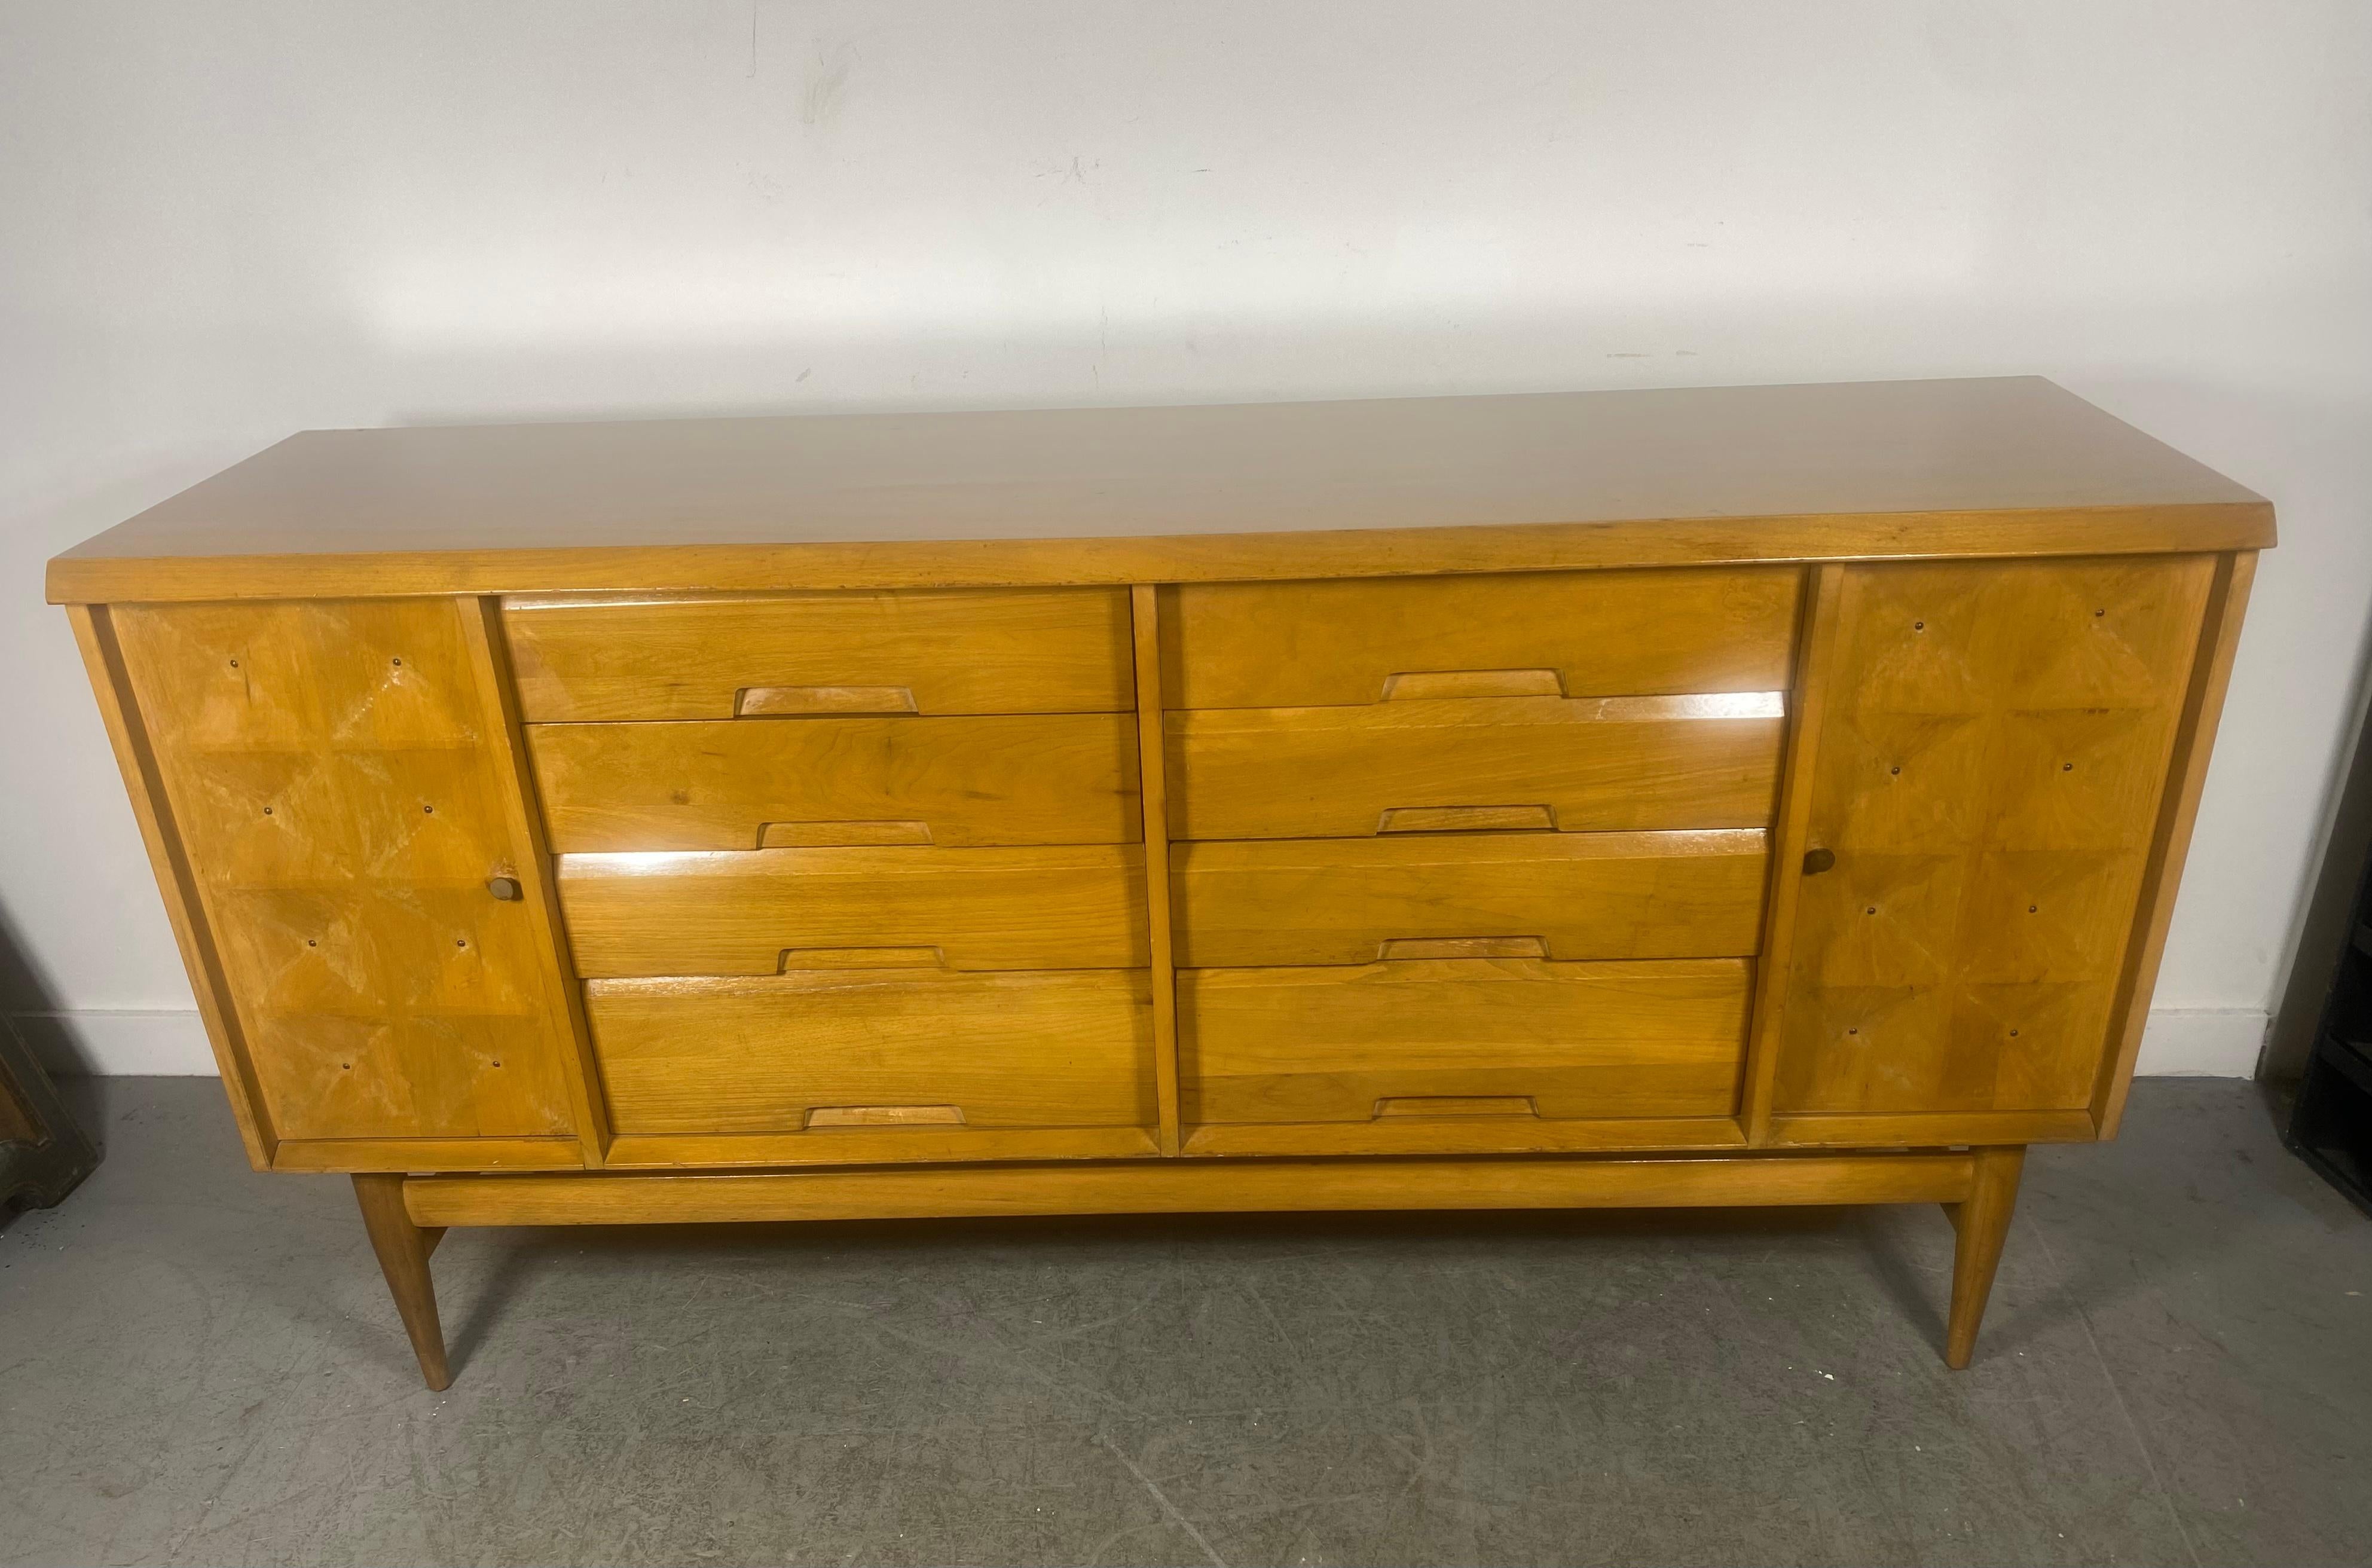 Modernist credenza /server, button tufted doors designed by Salvatore Bevelacqua, Classic design, amazing quality and construction. Featuring 8 dovetail drawers, left and right storage, retains original condition, finish, age appropriate wear, minor